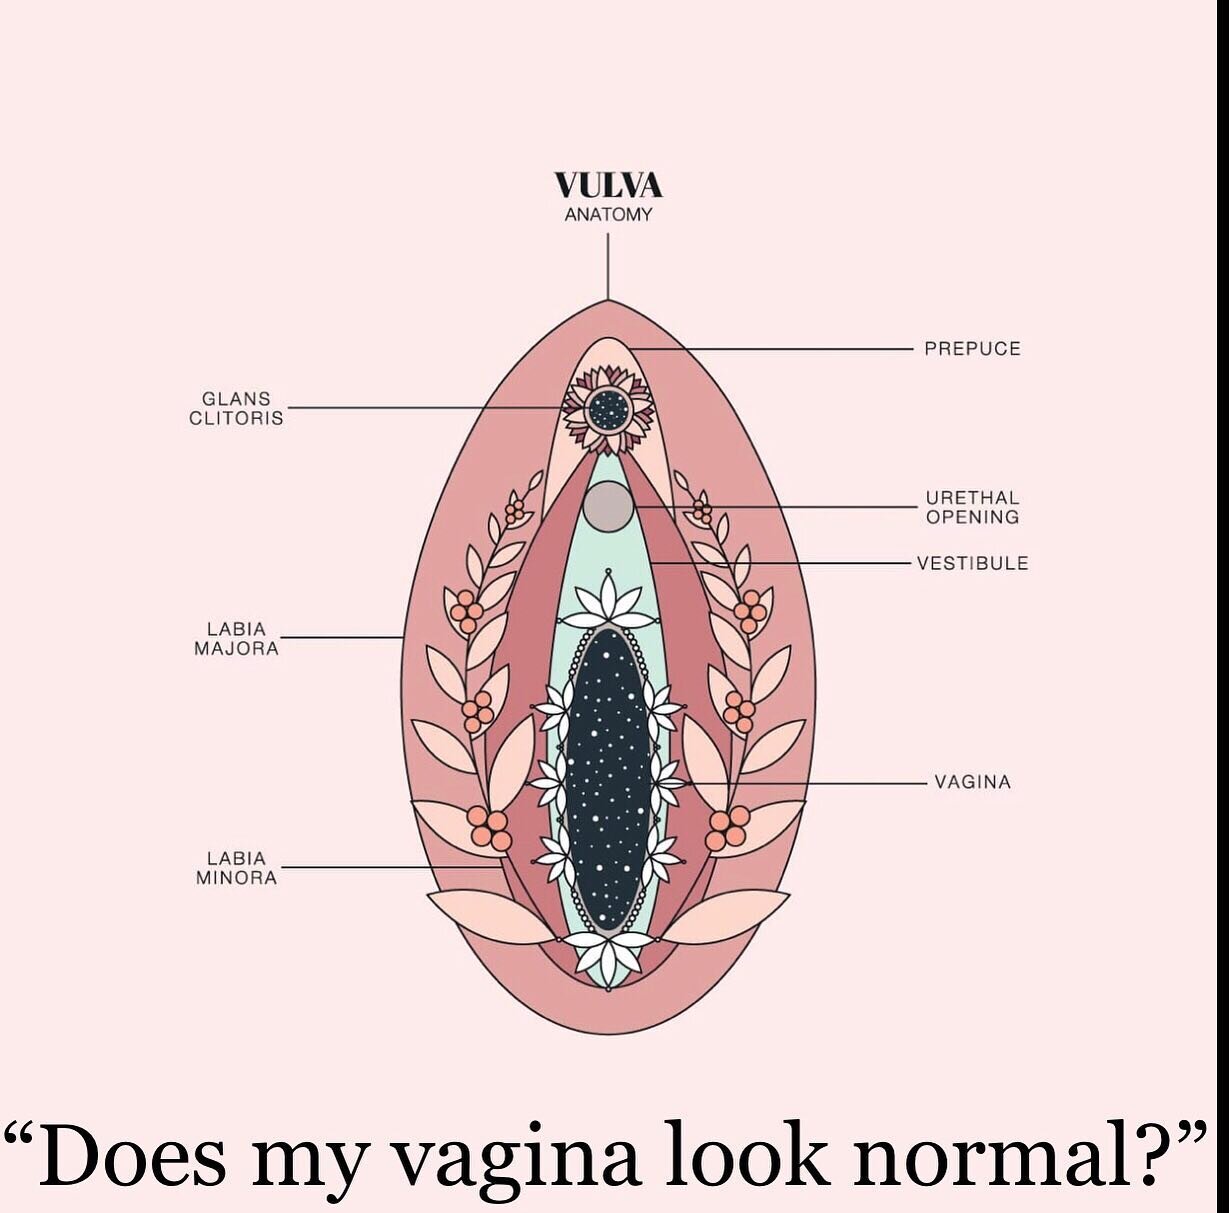 One of the most common questions I receive- but what is &ldquo;normal&rdquo; anyway?

The external genitalia is actually called the vulva, and includes the urethra, clitoris, labia and introitus (opening to the vaginal canal). Vulvas come in all diff